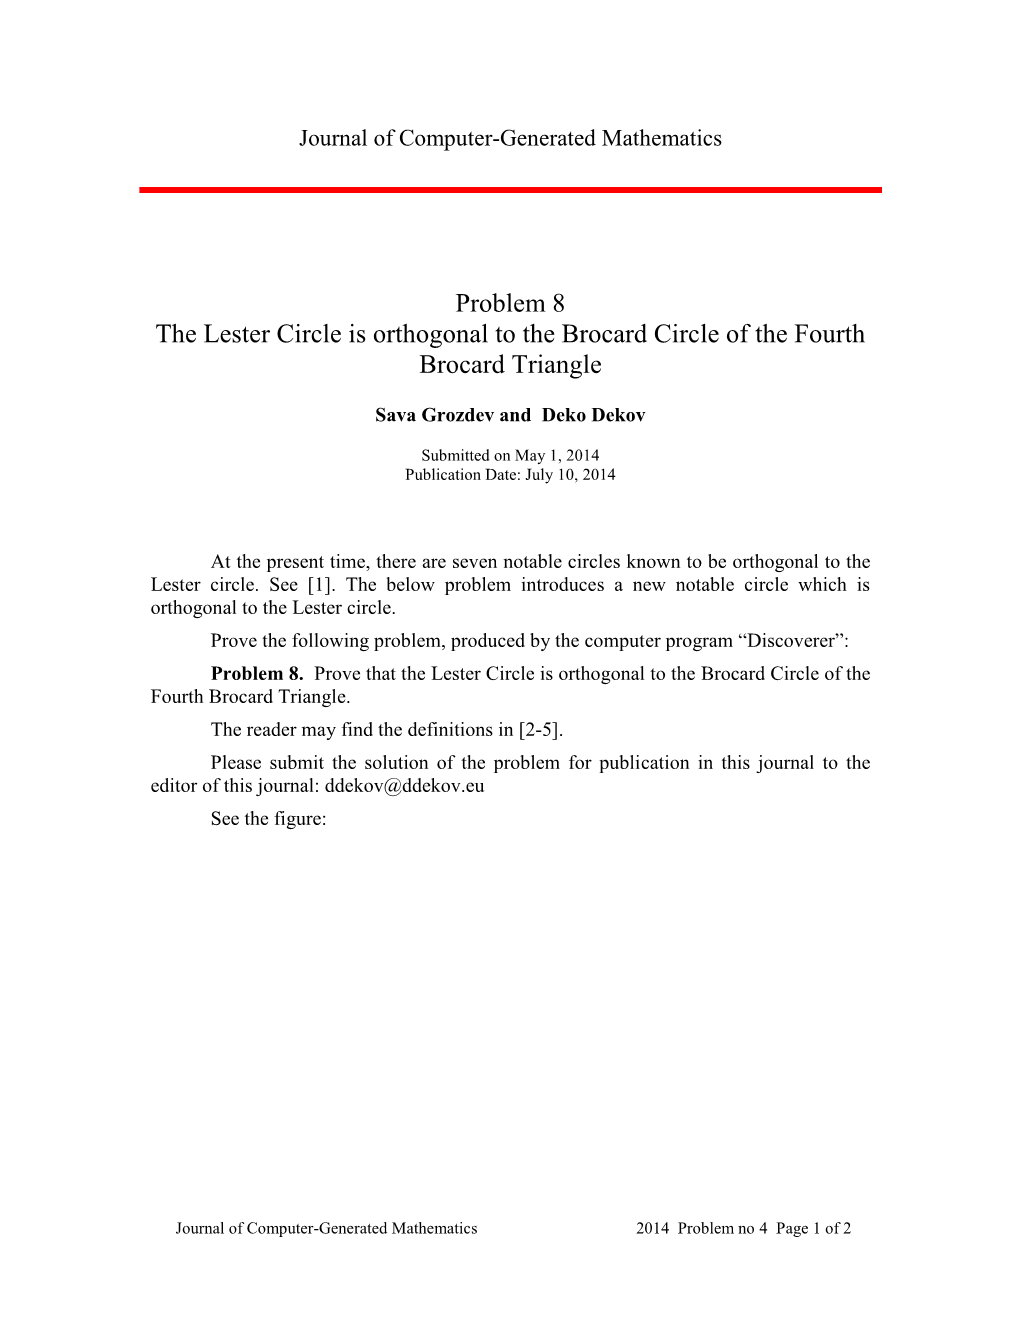 Sava Grozdev and Deko Dekov, the Lester Circle Is Orthogonal to the Brocard Circle Of